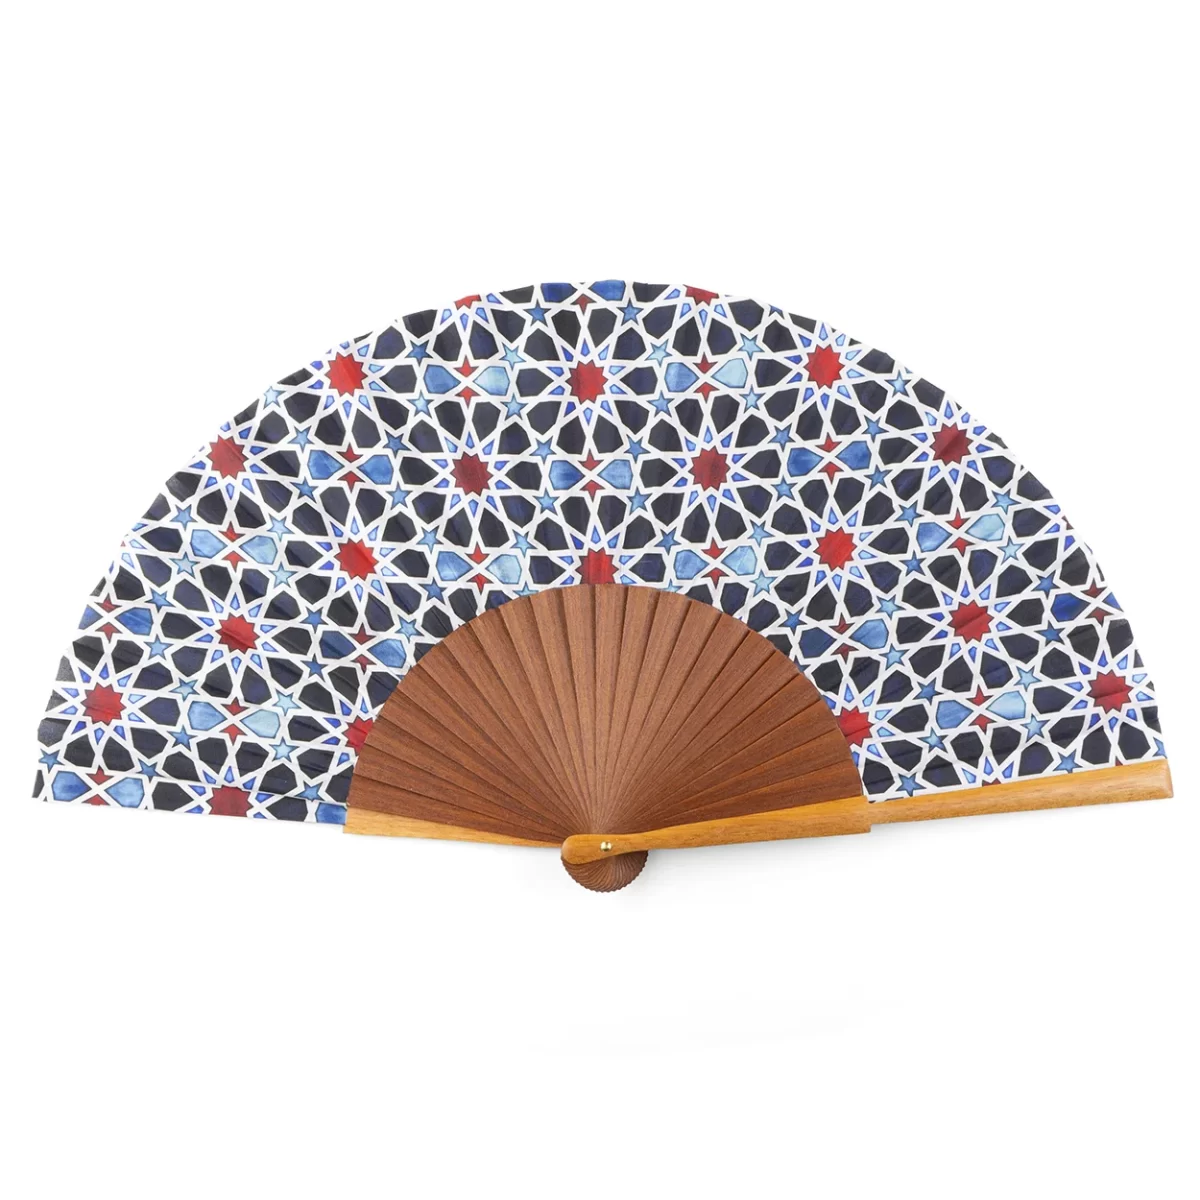 Black and blue silk fan with bocapi wood.